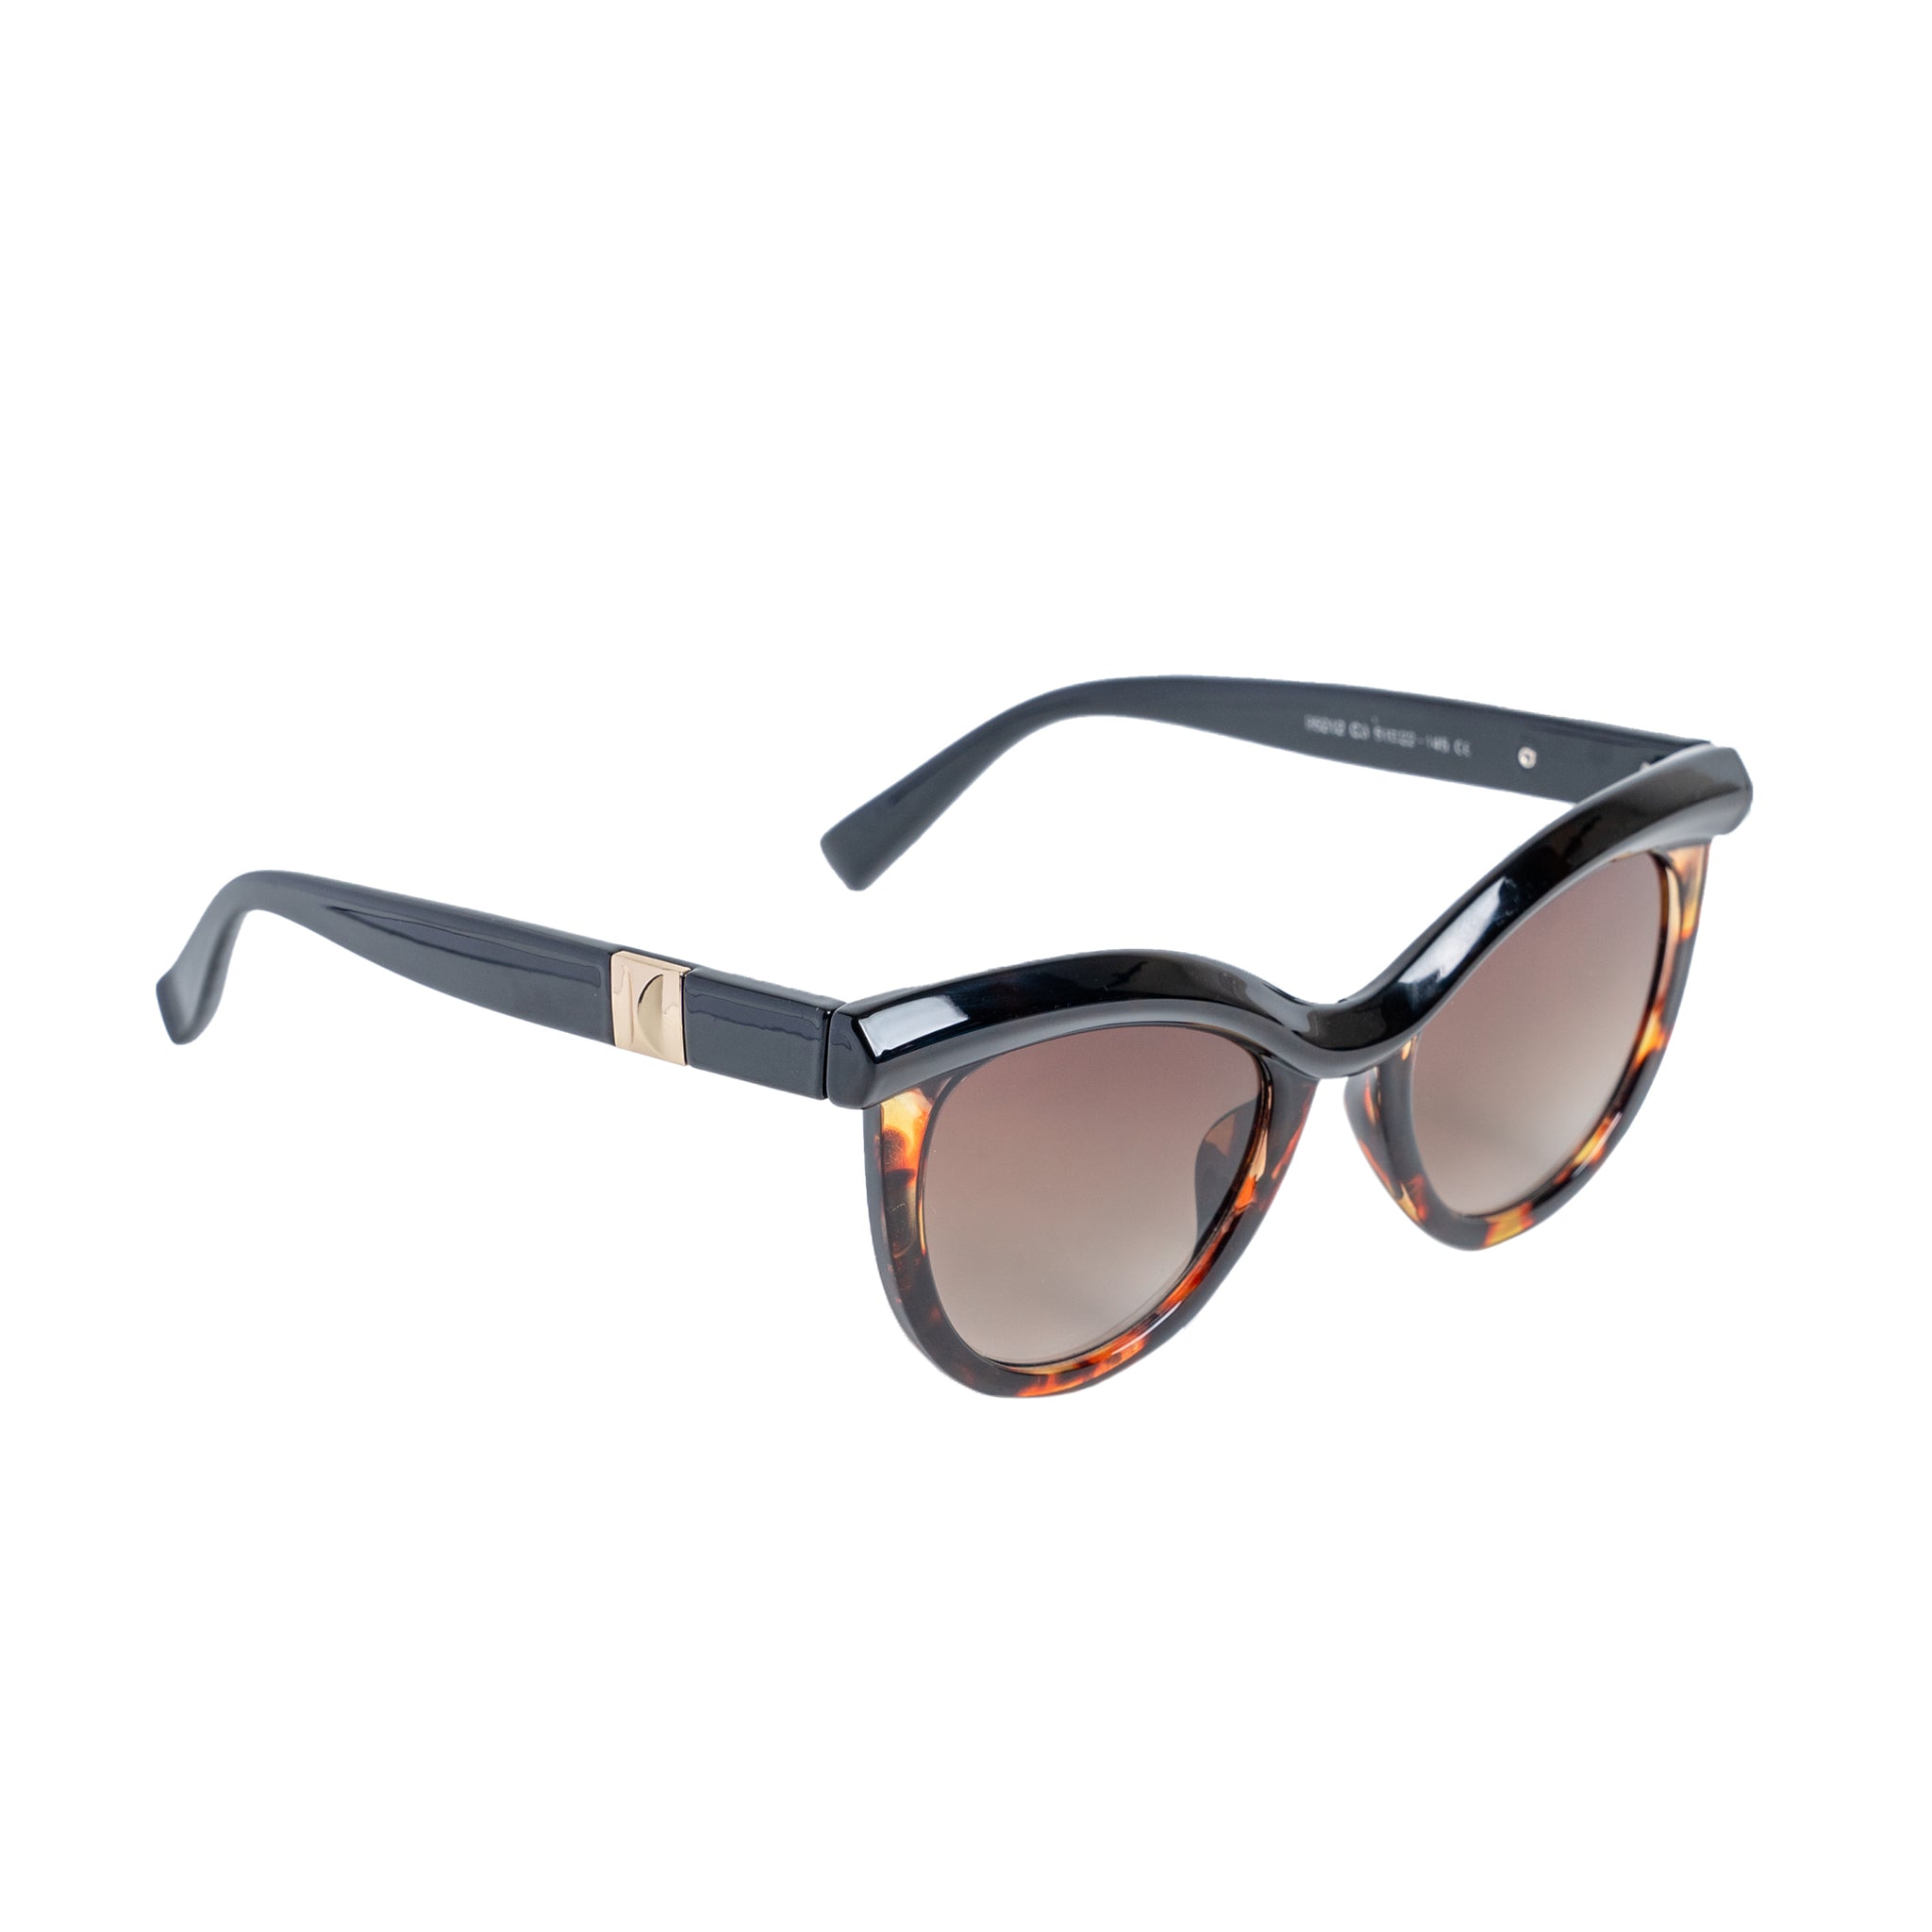 Chokore Vintage Cat-Eye Sunglasses with UV400 Protection (Black & Brown)